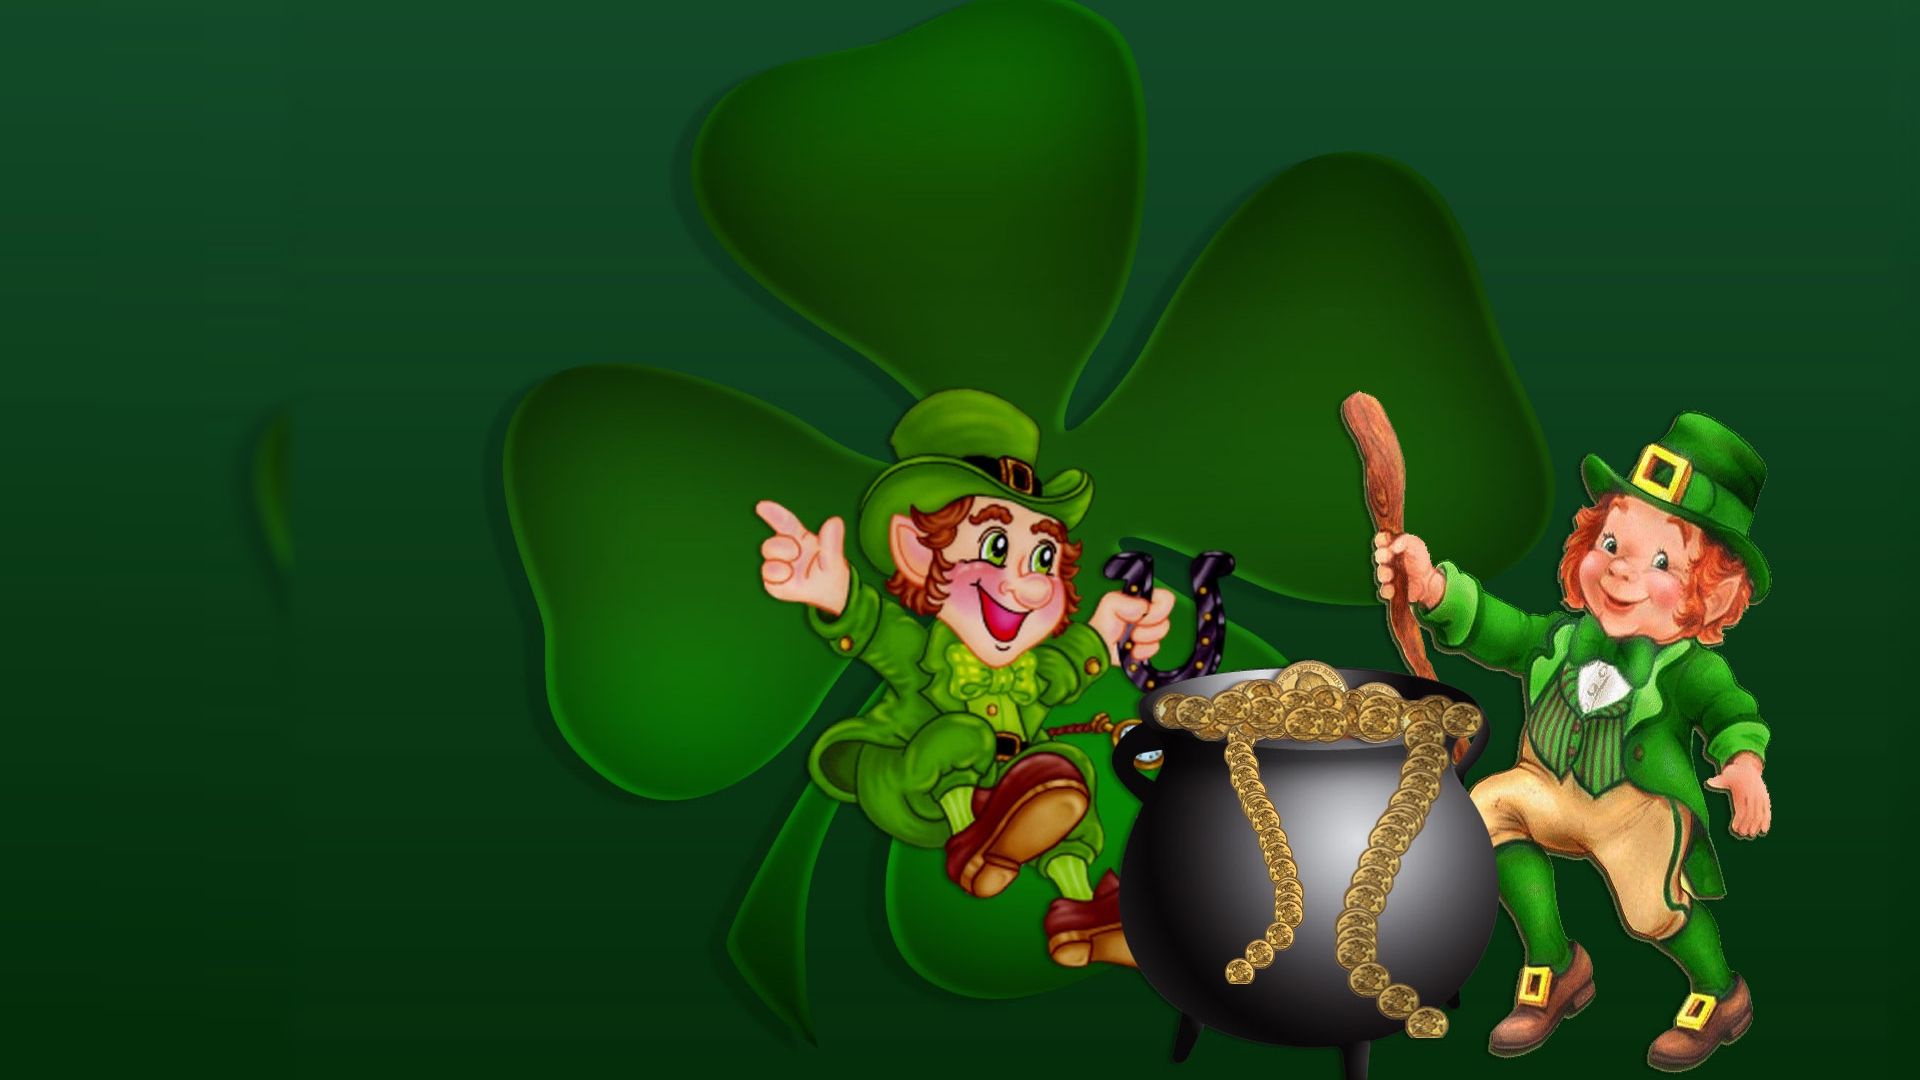 st patrick day hd desktop background hd wallpapers Car Pictures